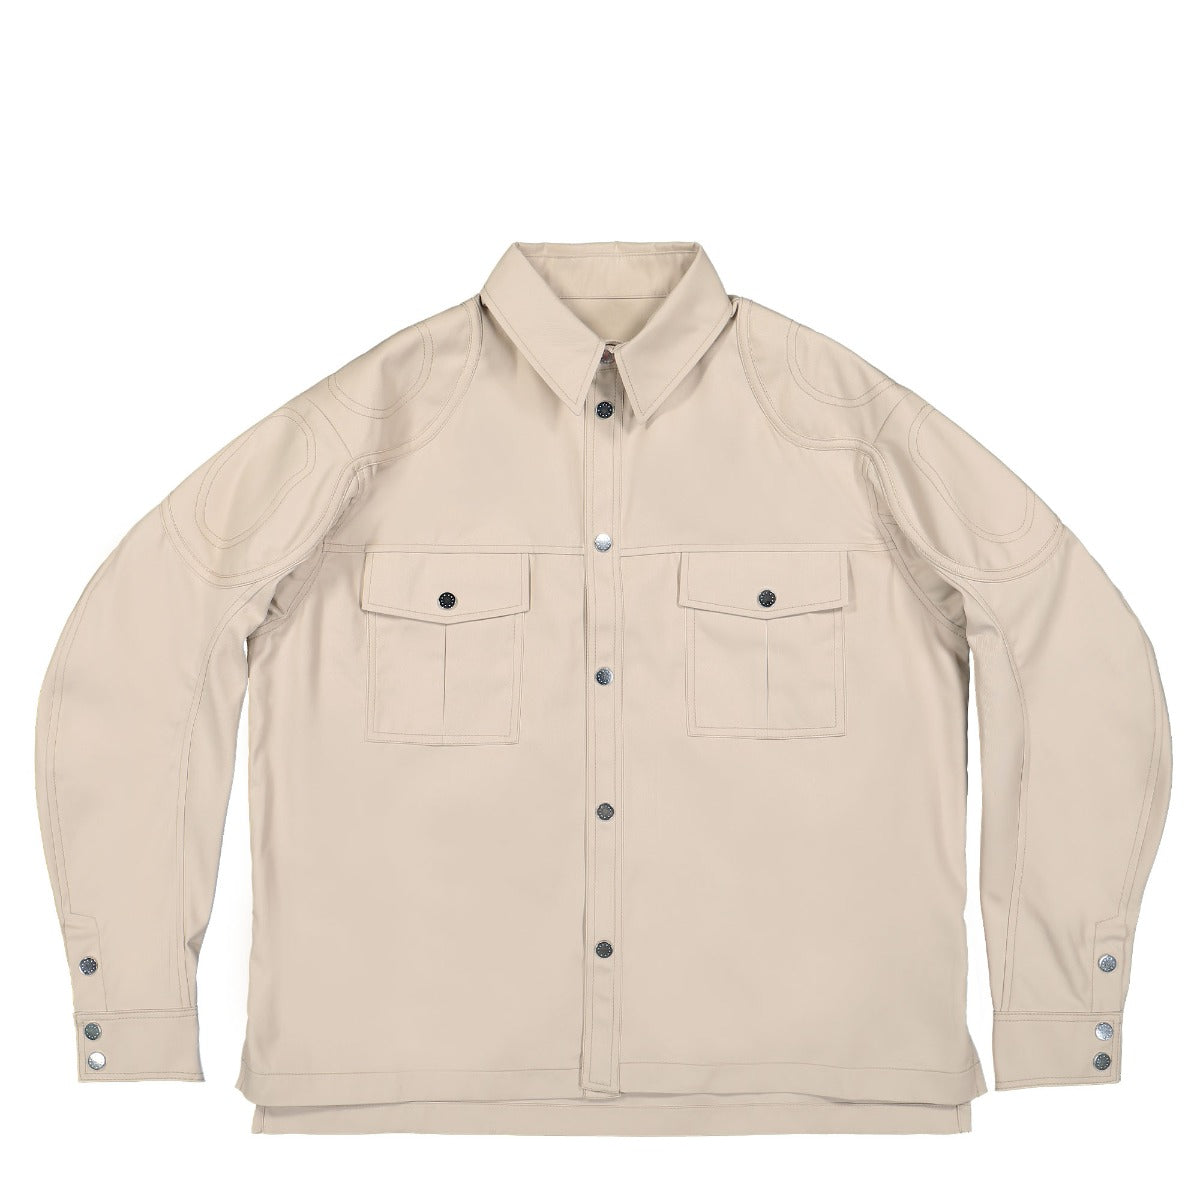 Overshirt W Patches